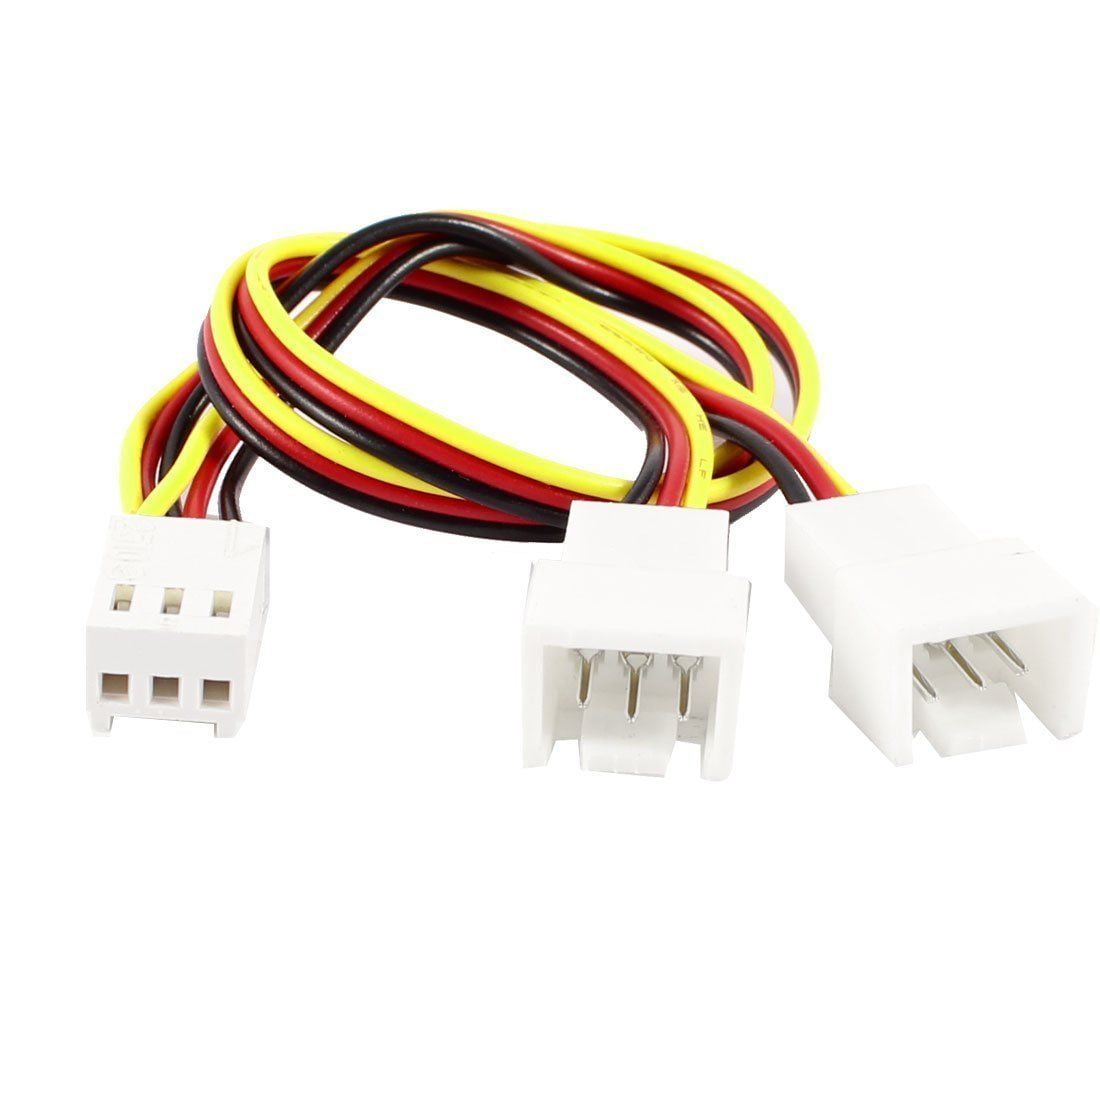 5PCS PC Fan Male 4-Pin Convert to 2x Female 4-Pin Y-Splitter Cable Connector 